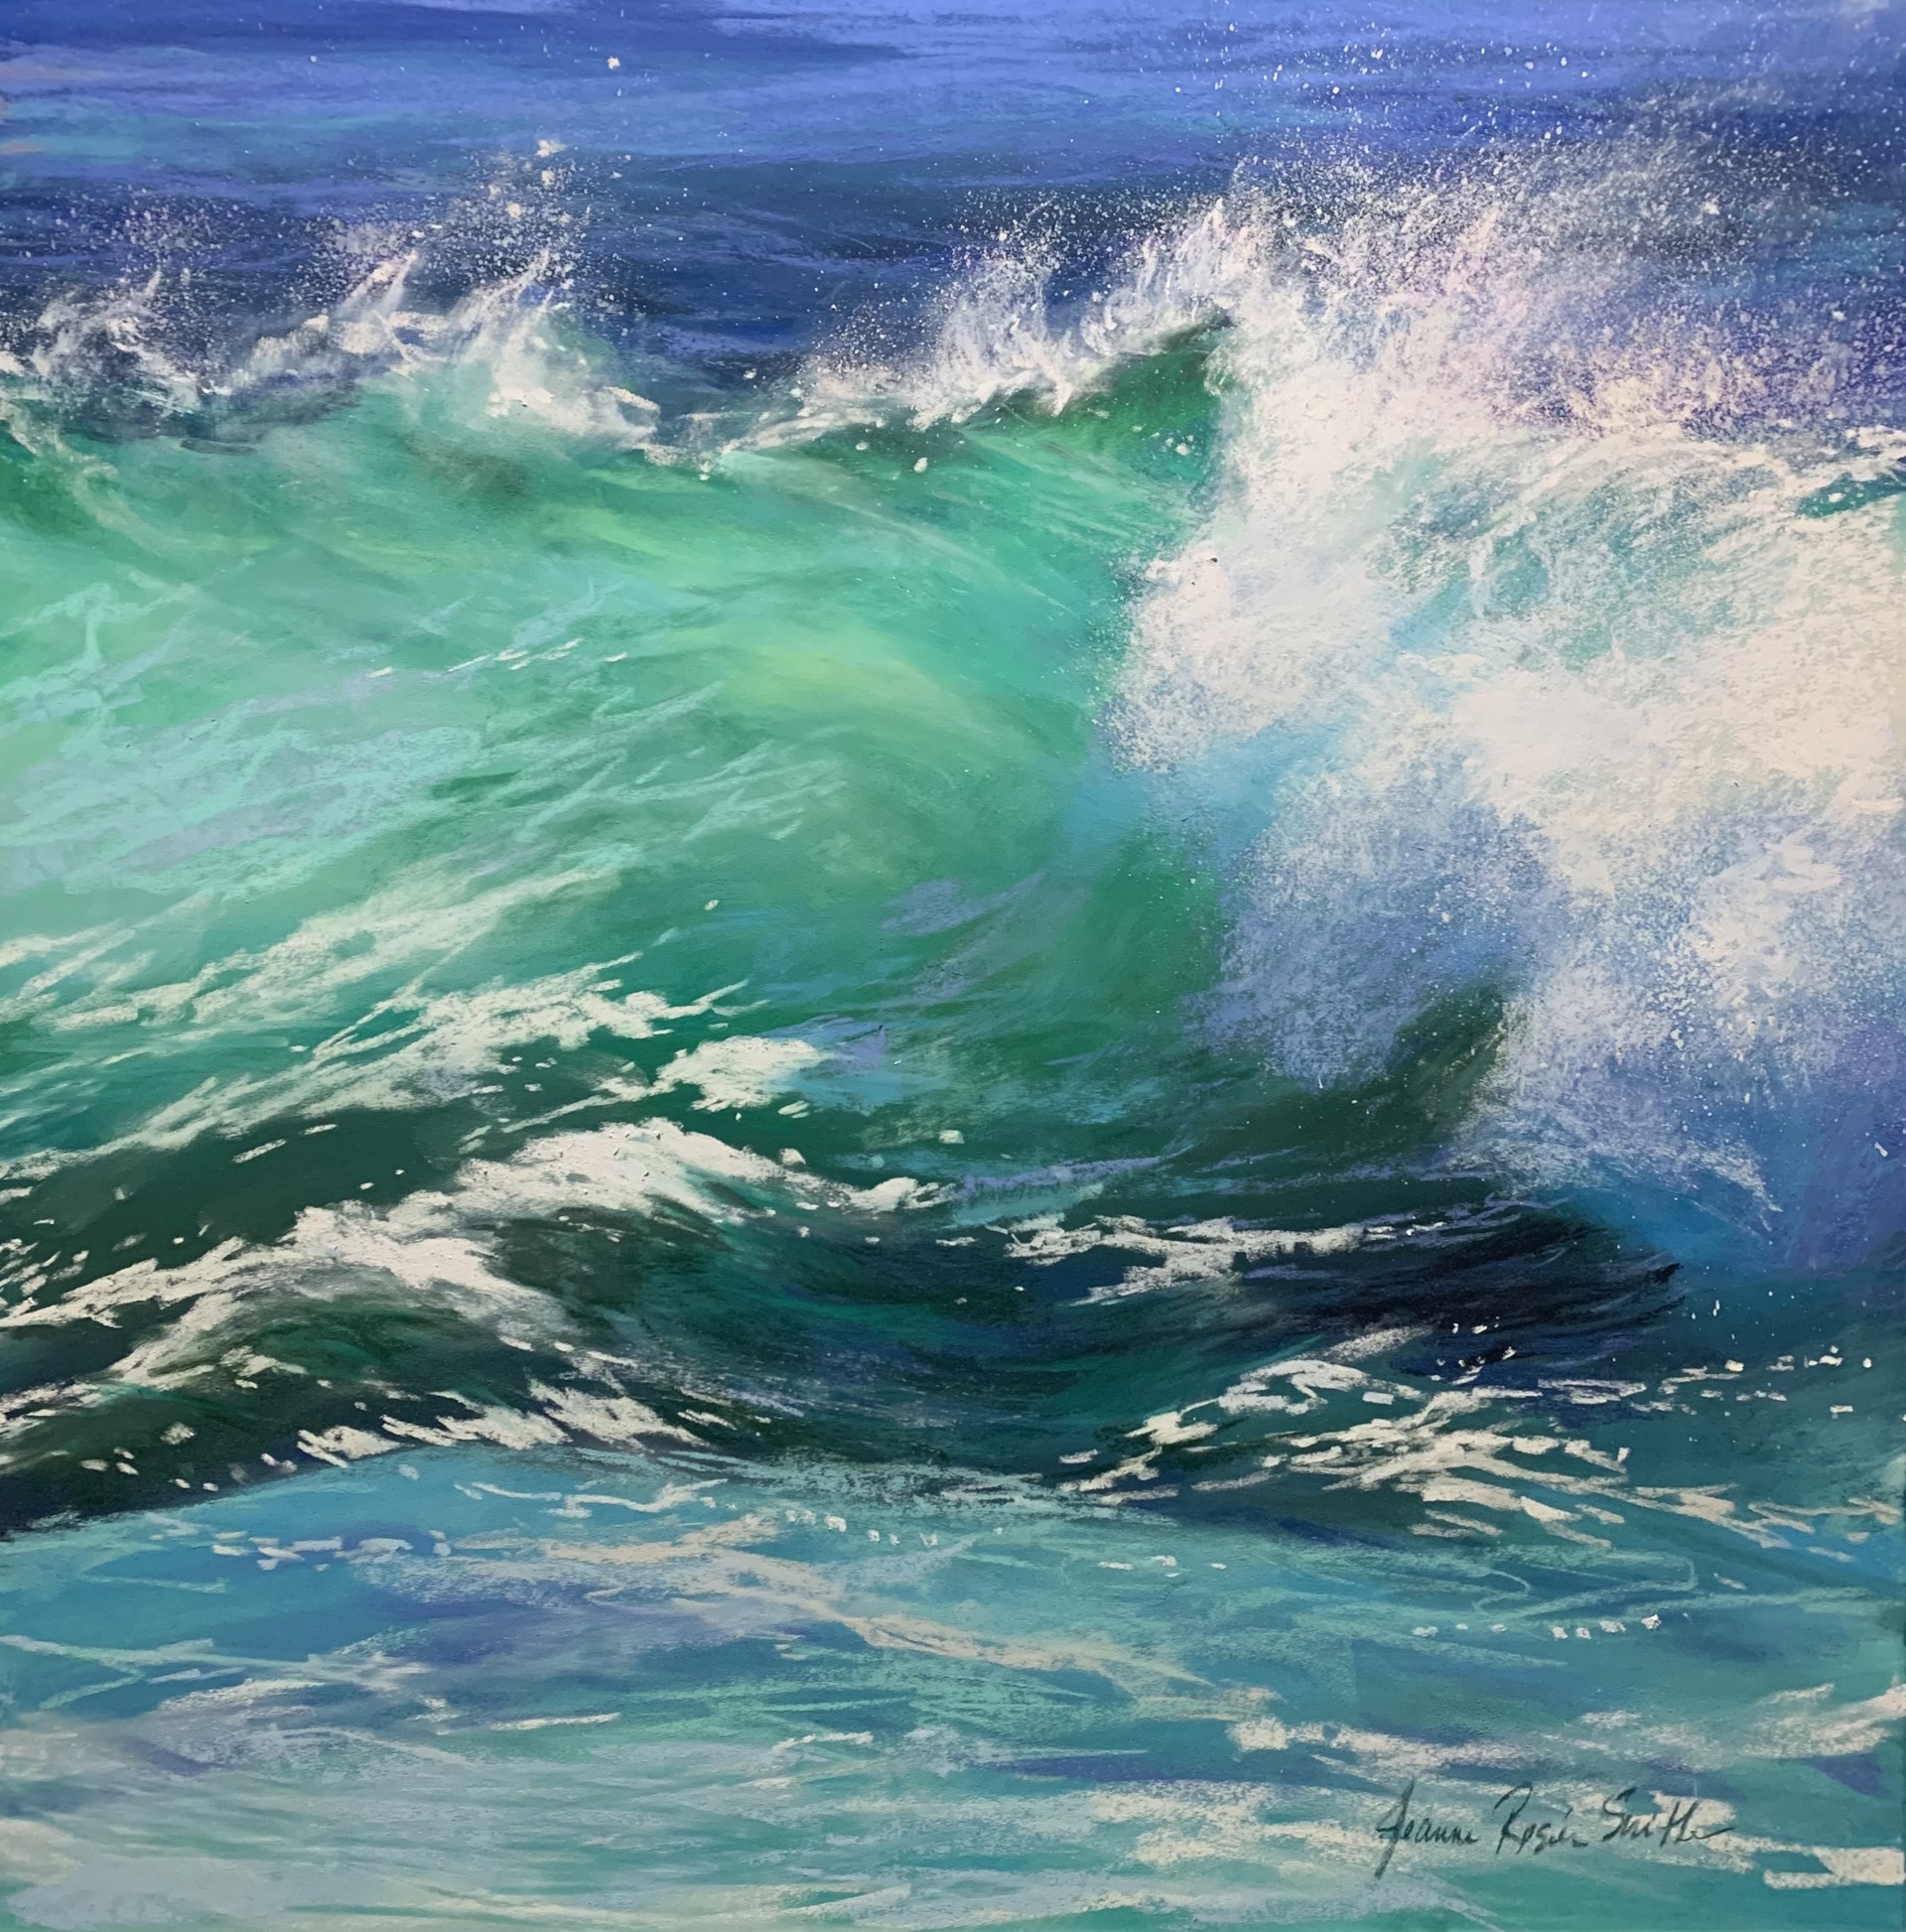 Riding the Swells by Jeanne Rosier Smith